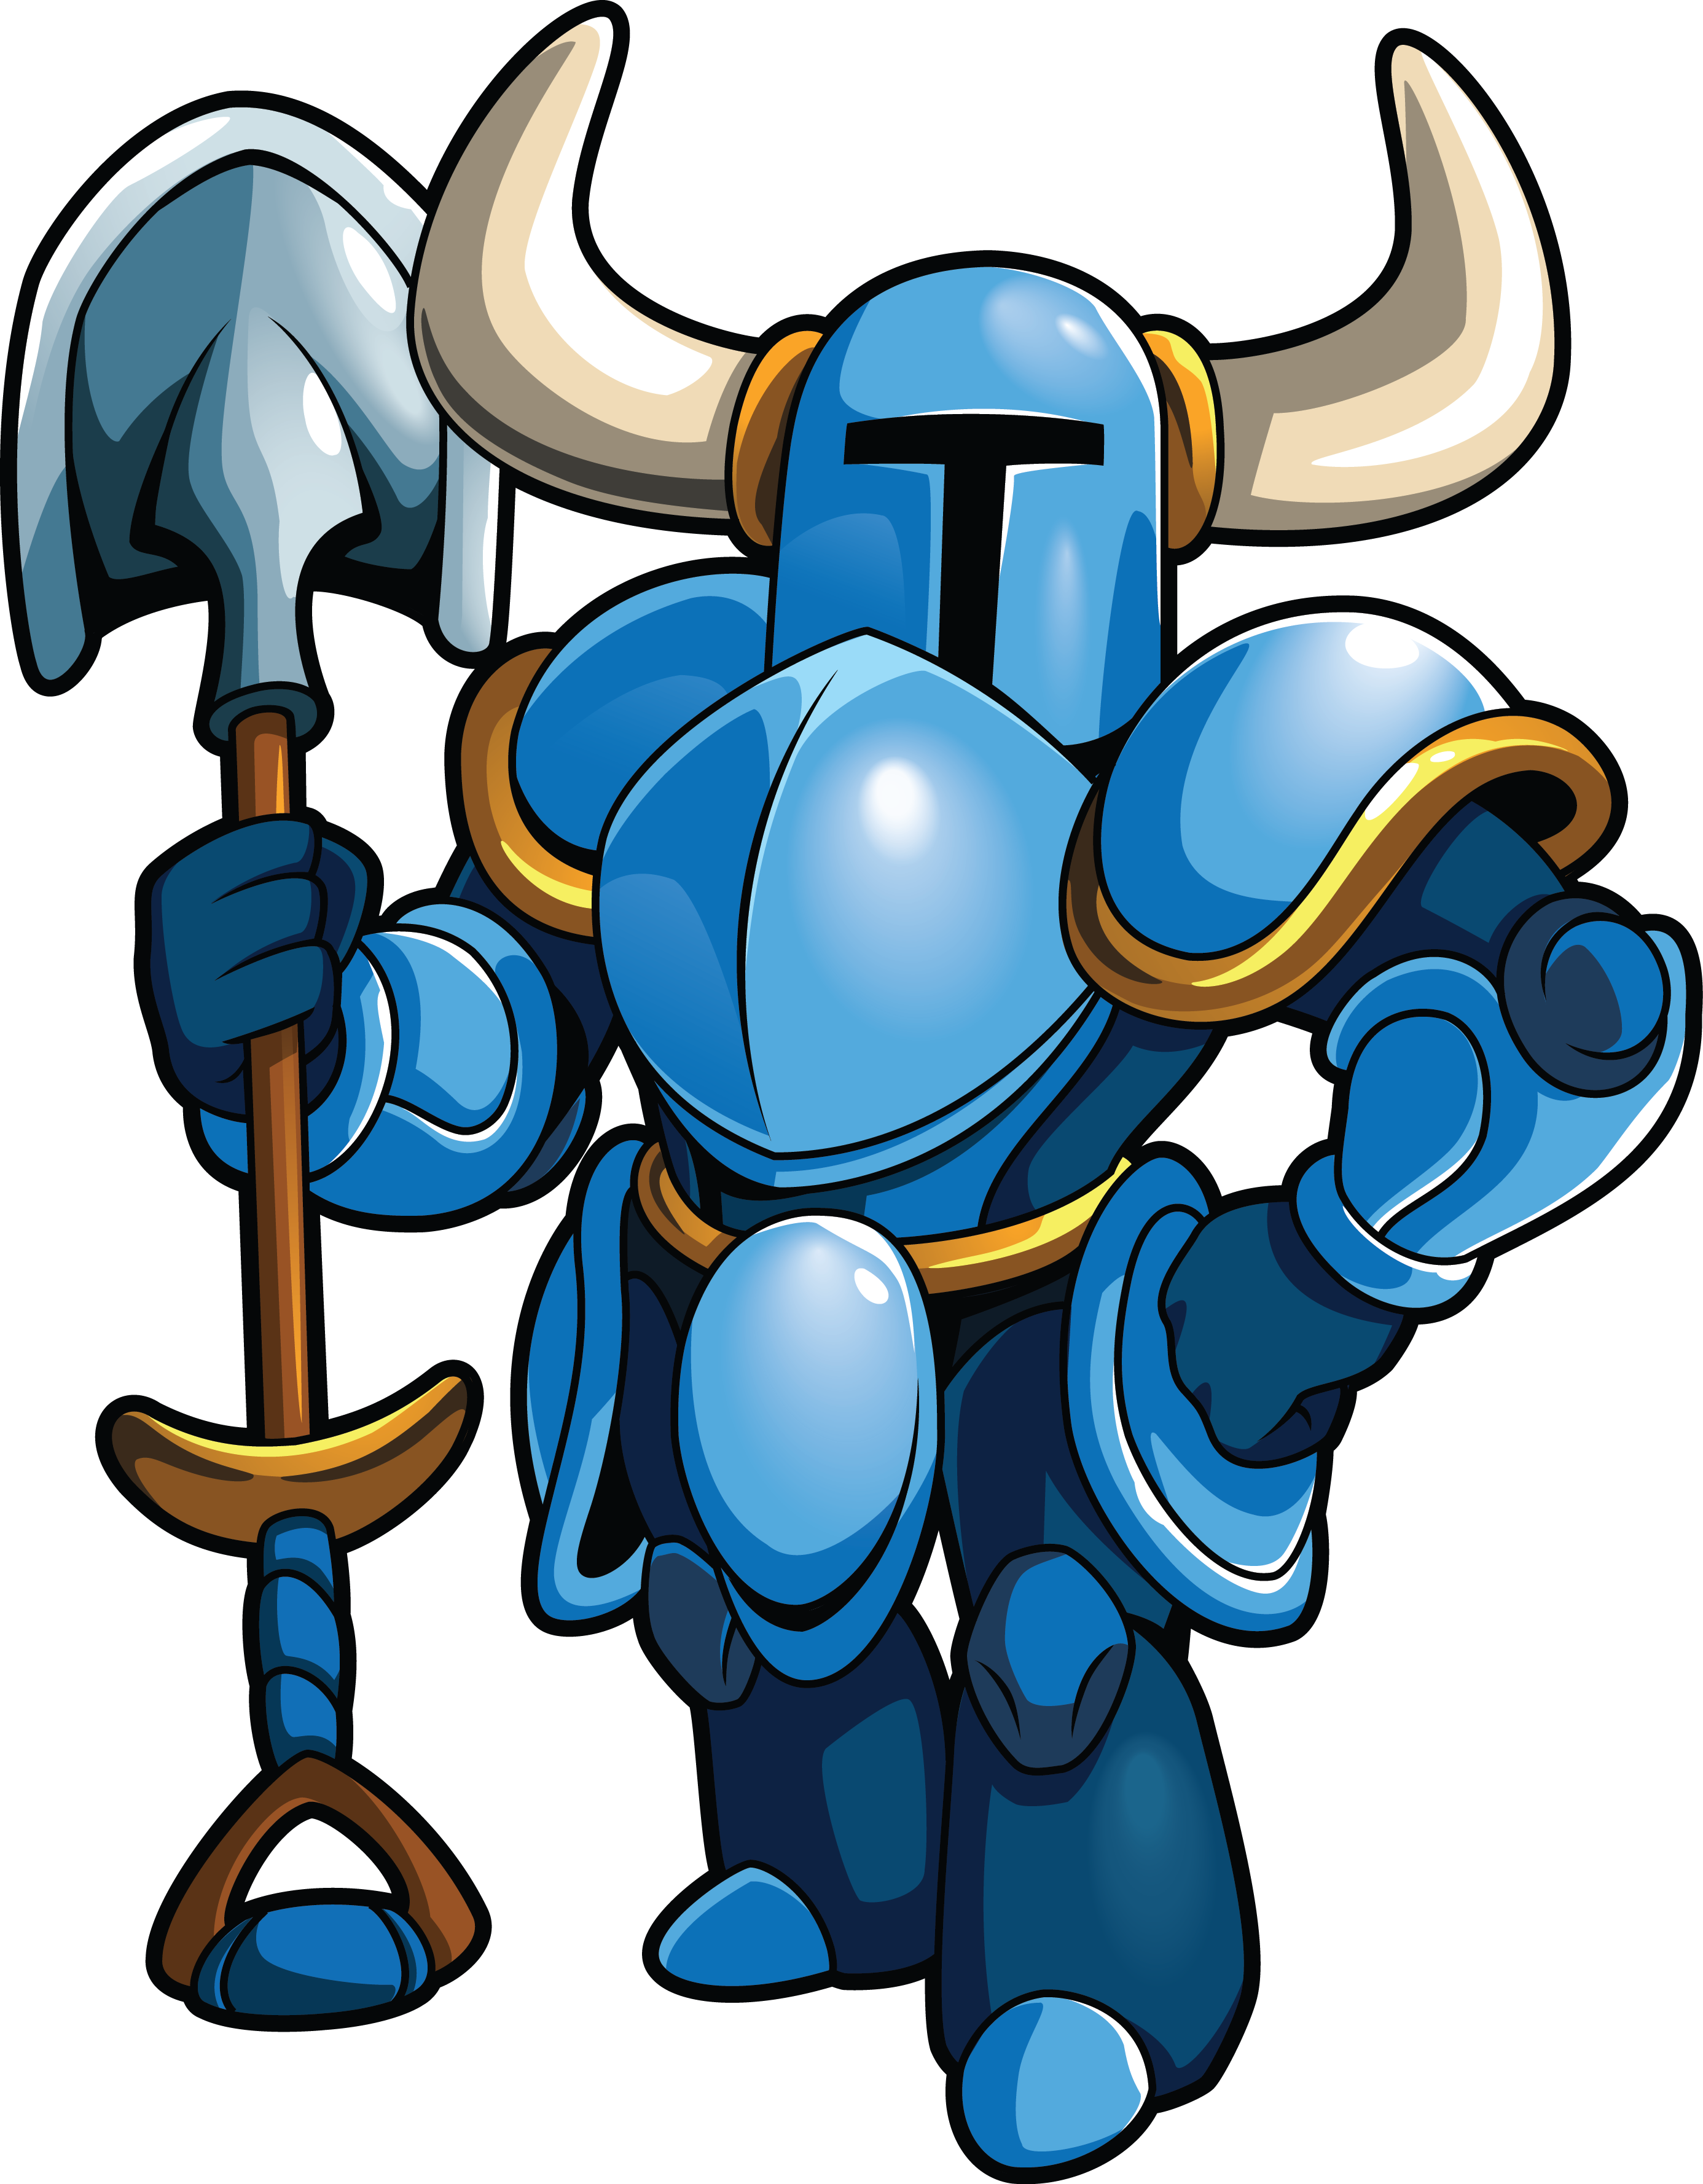 Cartoon Character In A Blue Armor Holding A Spear